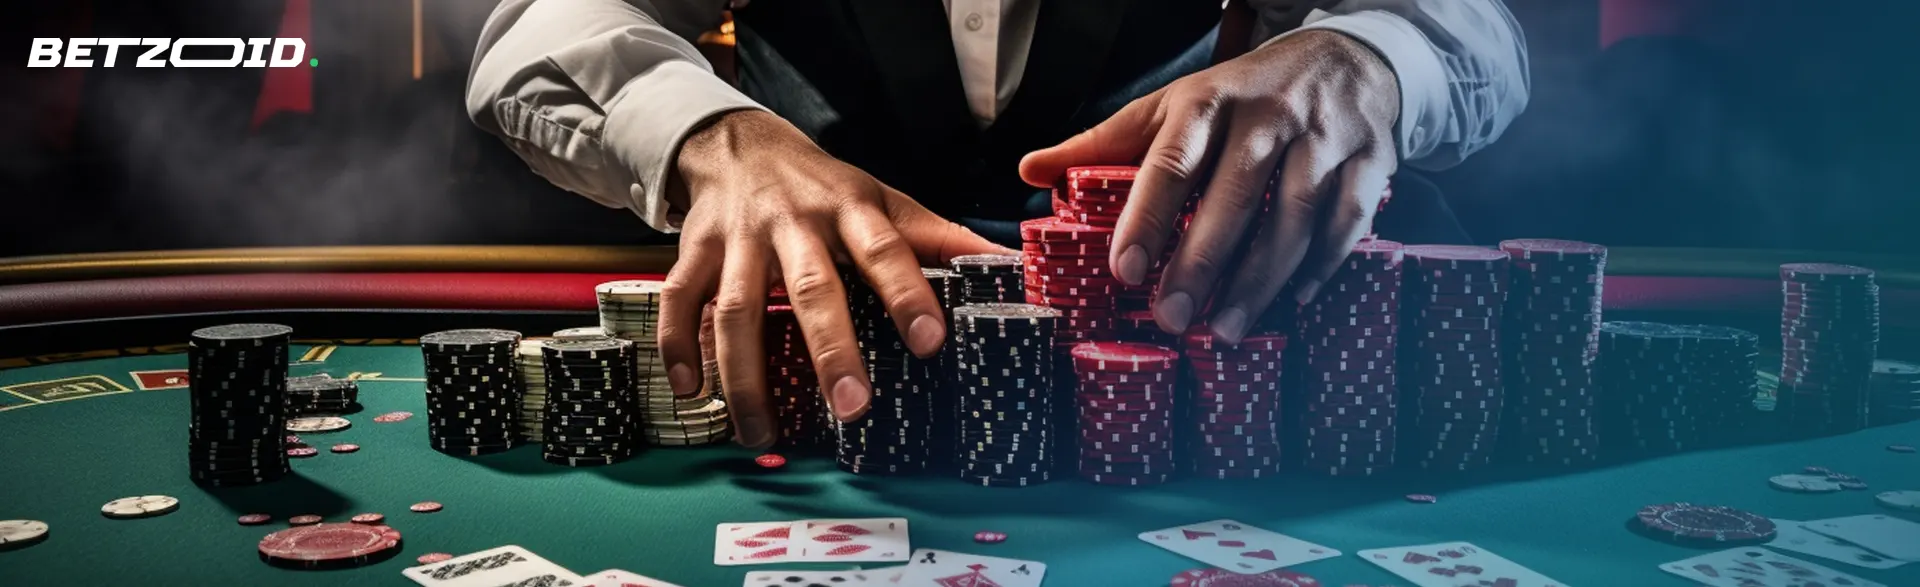 A croupier raking in the chips at reliable online casinos.